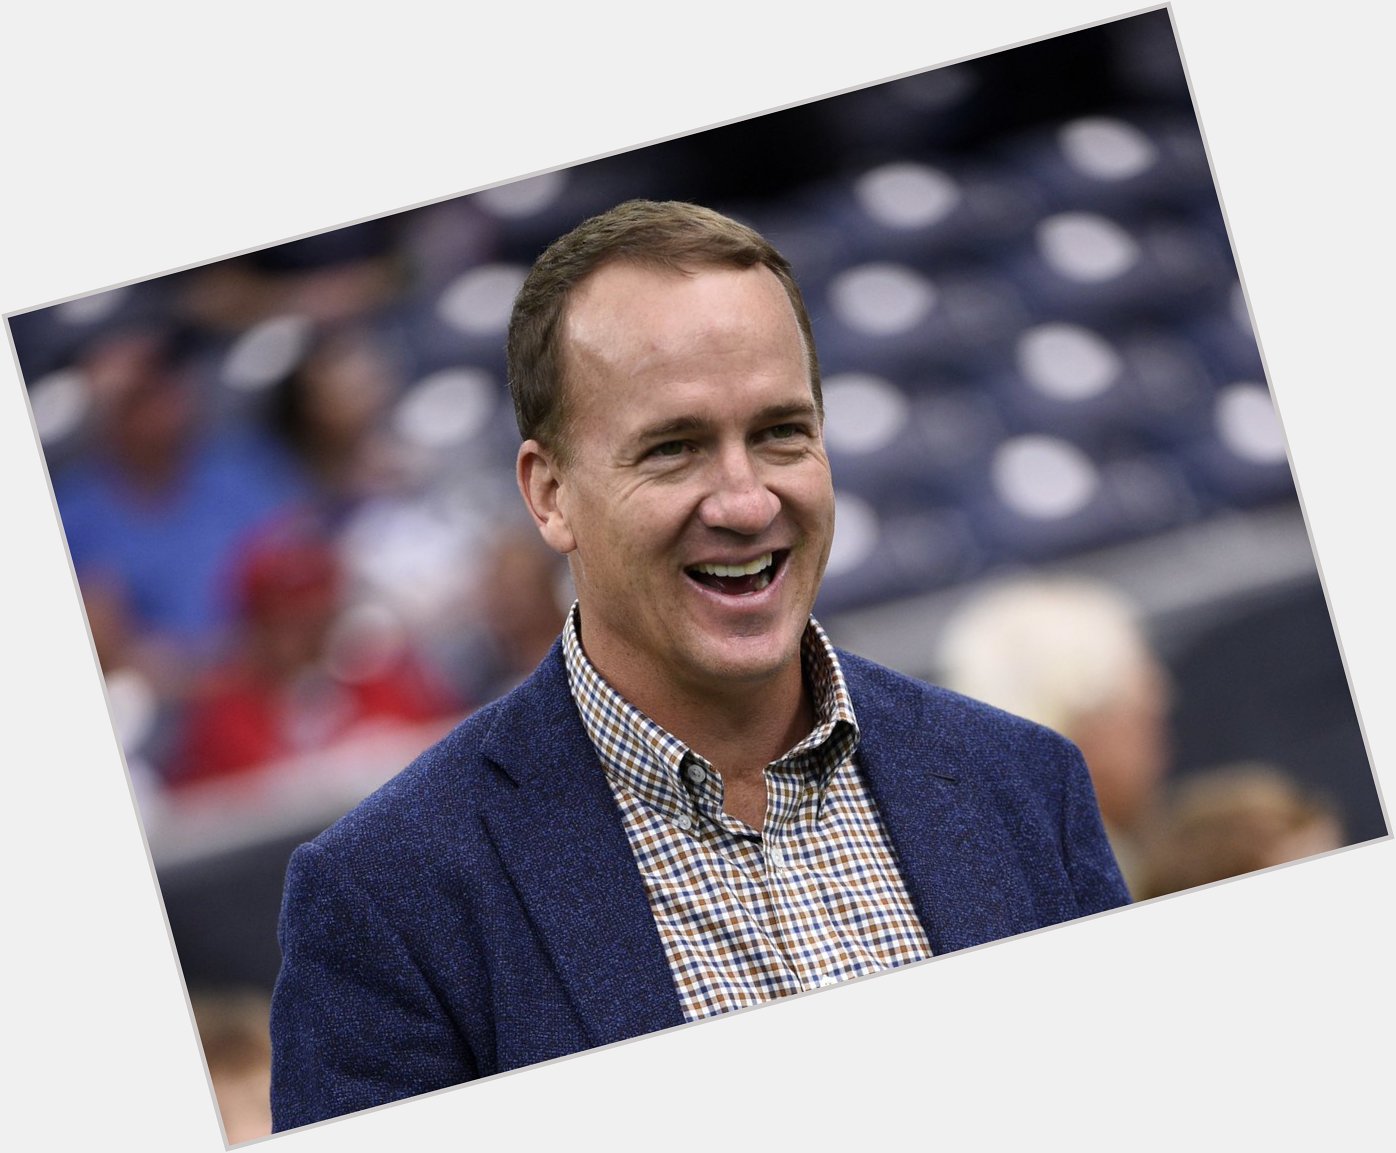 Happy birthday to former quarterback Peyton Manning, who turned 43 years old today:  